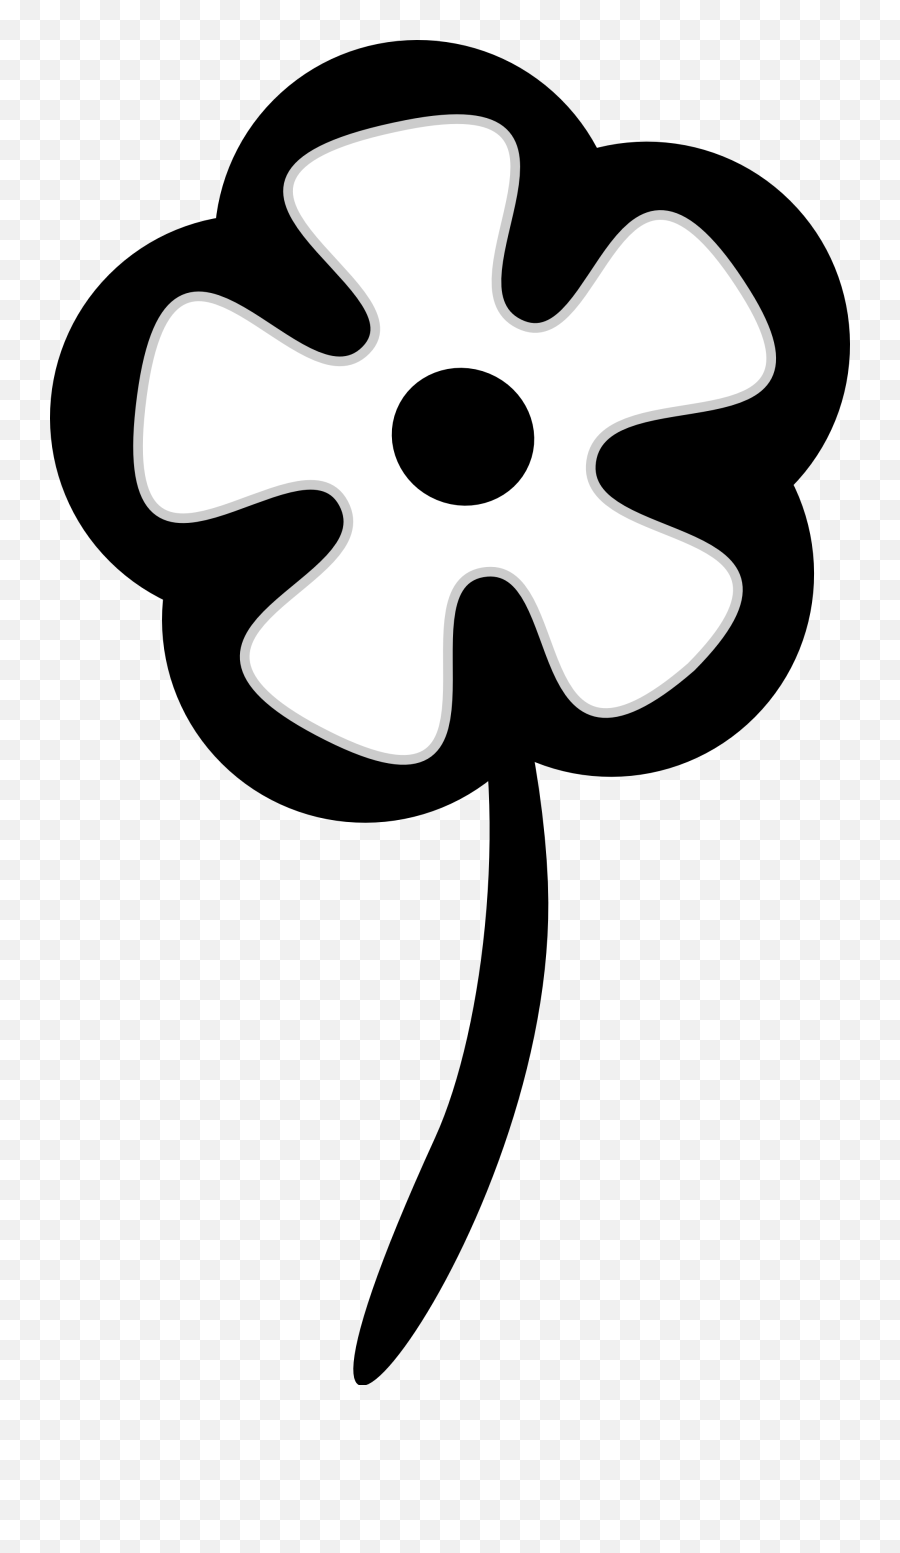 Free Flower Images Black And White Download Free Clip Art - Black And White Graphic Simple Emoji,Flower Clipart Black And White